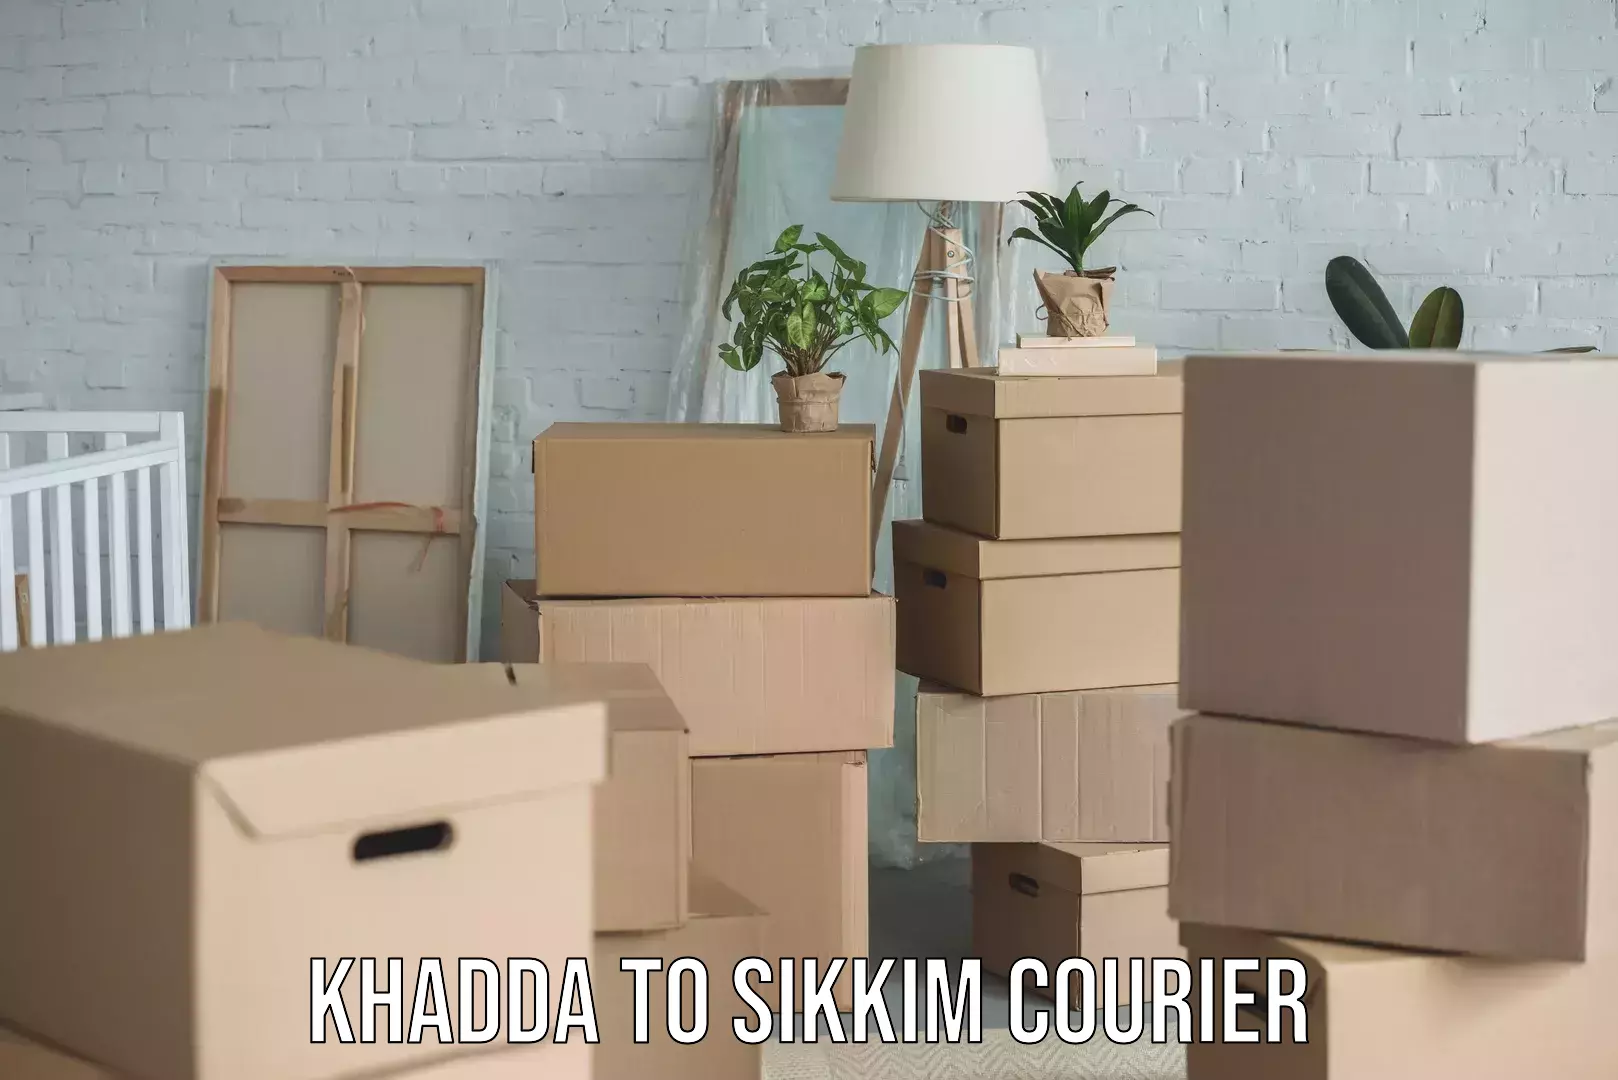 Furniture delivery service Khadda to Sikkim